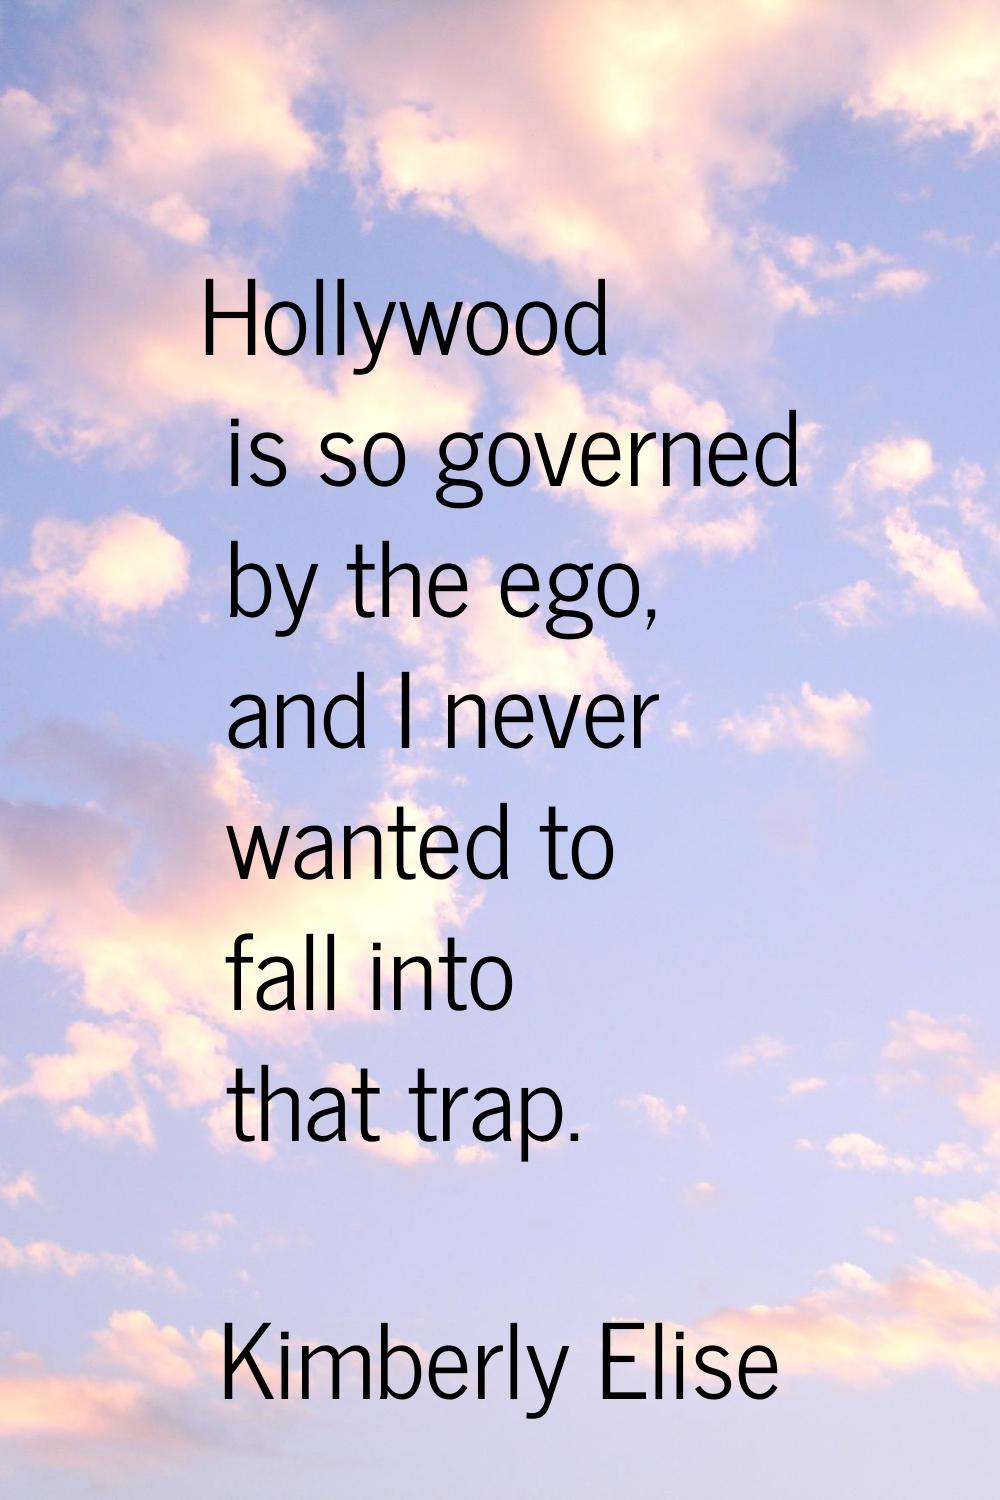 Hollywood is so governed by the ego, and I never wanted to fall into that trap.